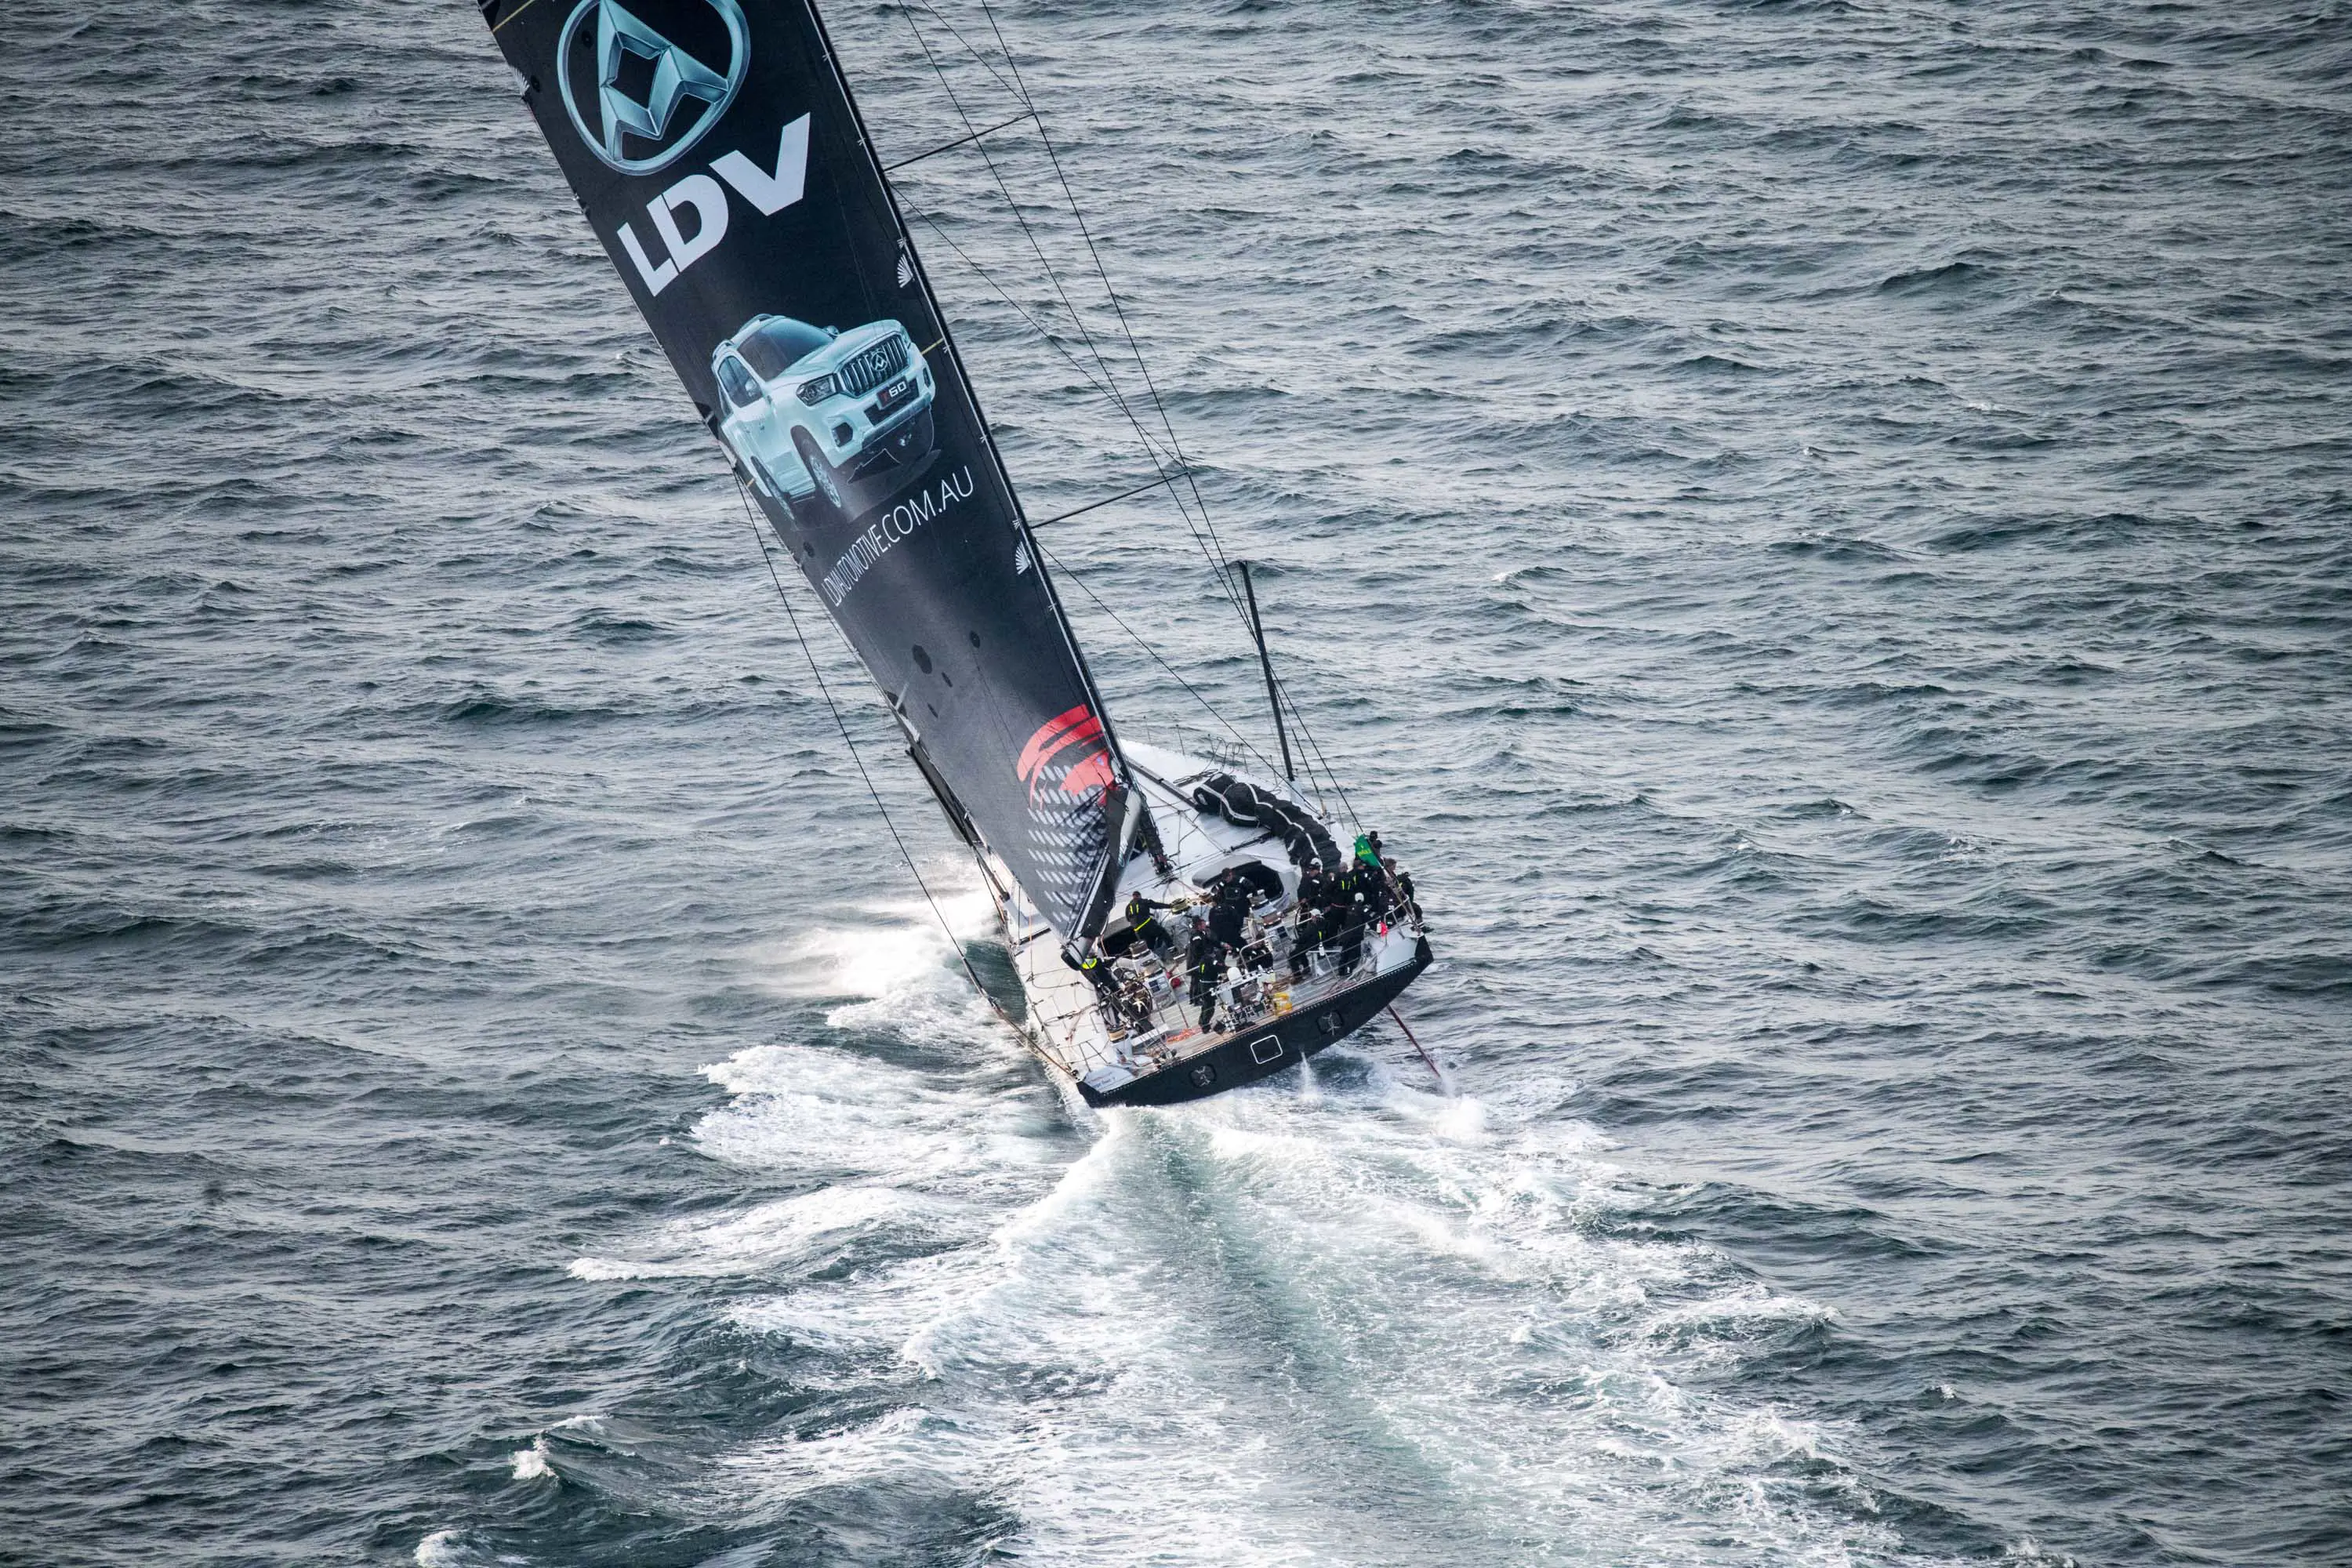 A racing yacht with a large black sail leans in to a turn on wavey seas.